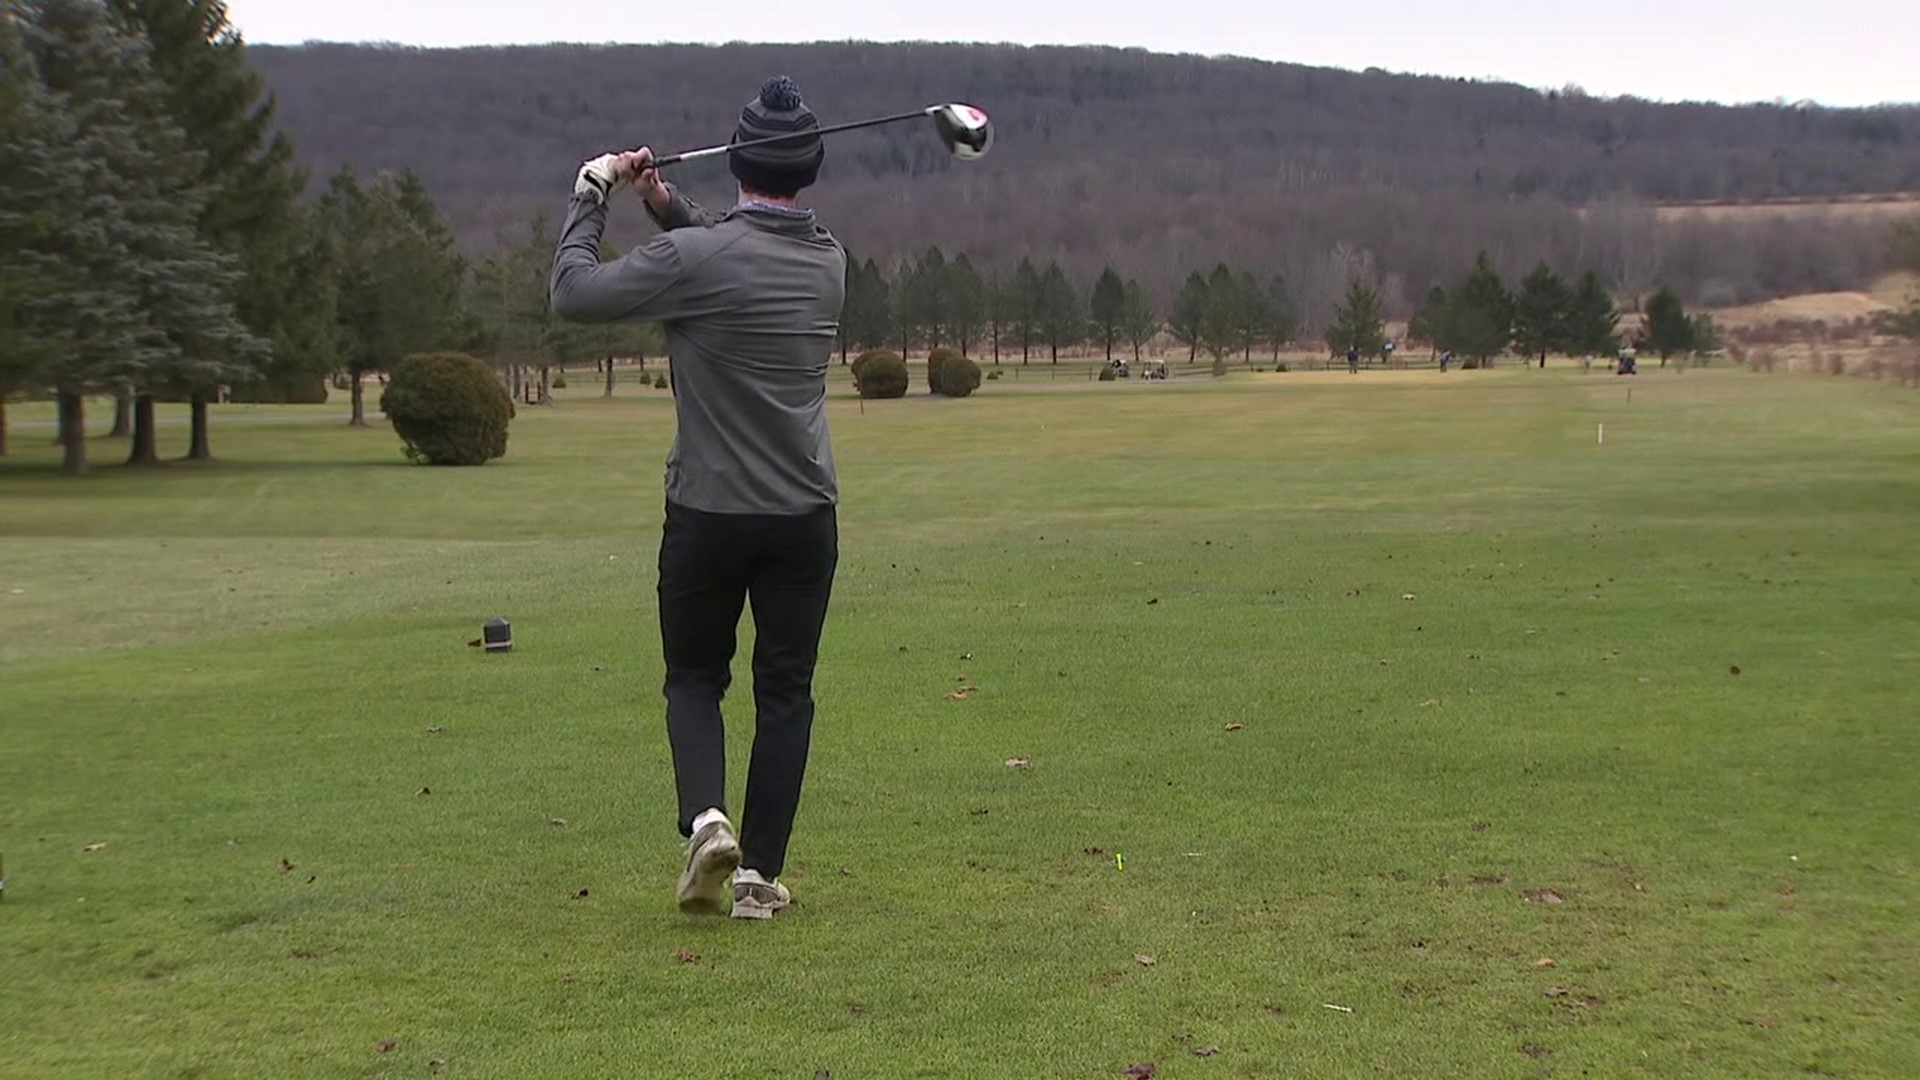 The warm weather allowed golfers near Carbondale to get in some holiday swings.